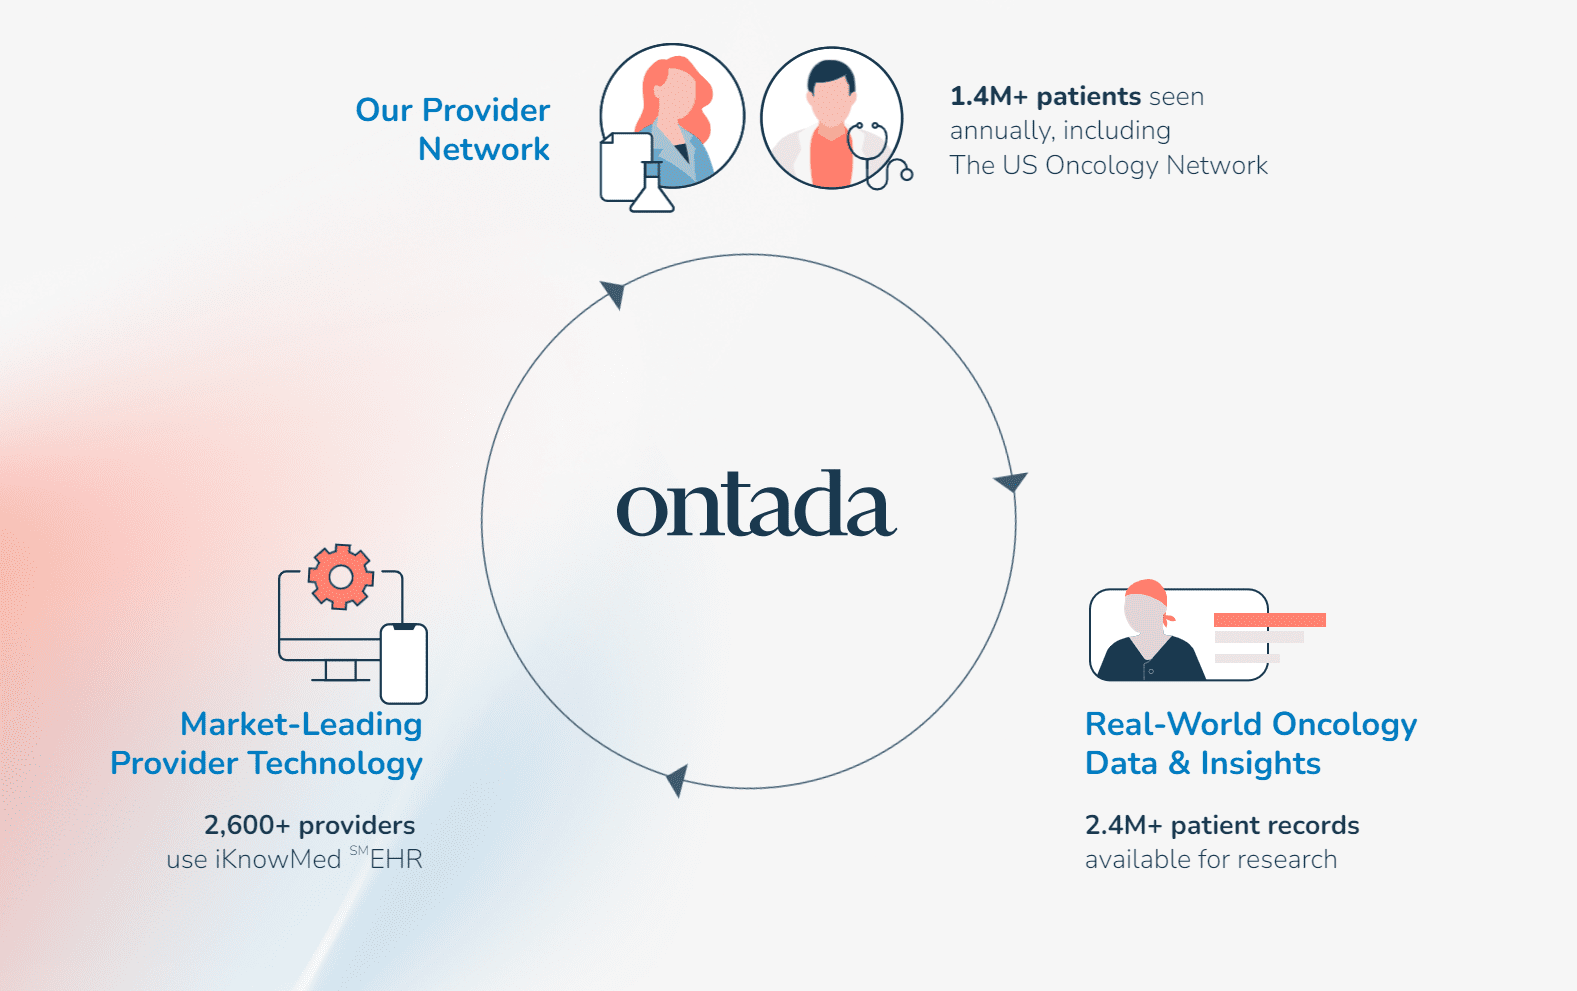 FDA Selects Ontada to Investigate Rare Cancers Treated in US Community Oncology Setting